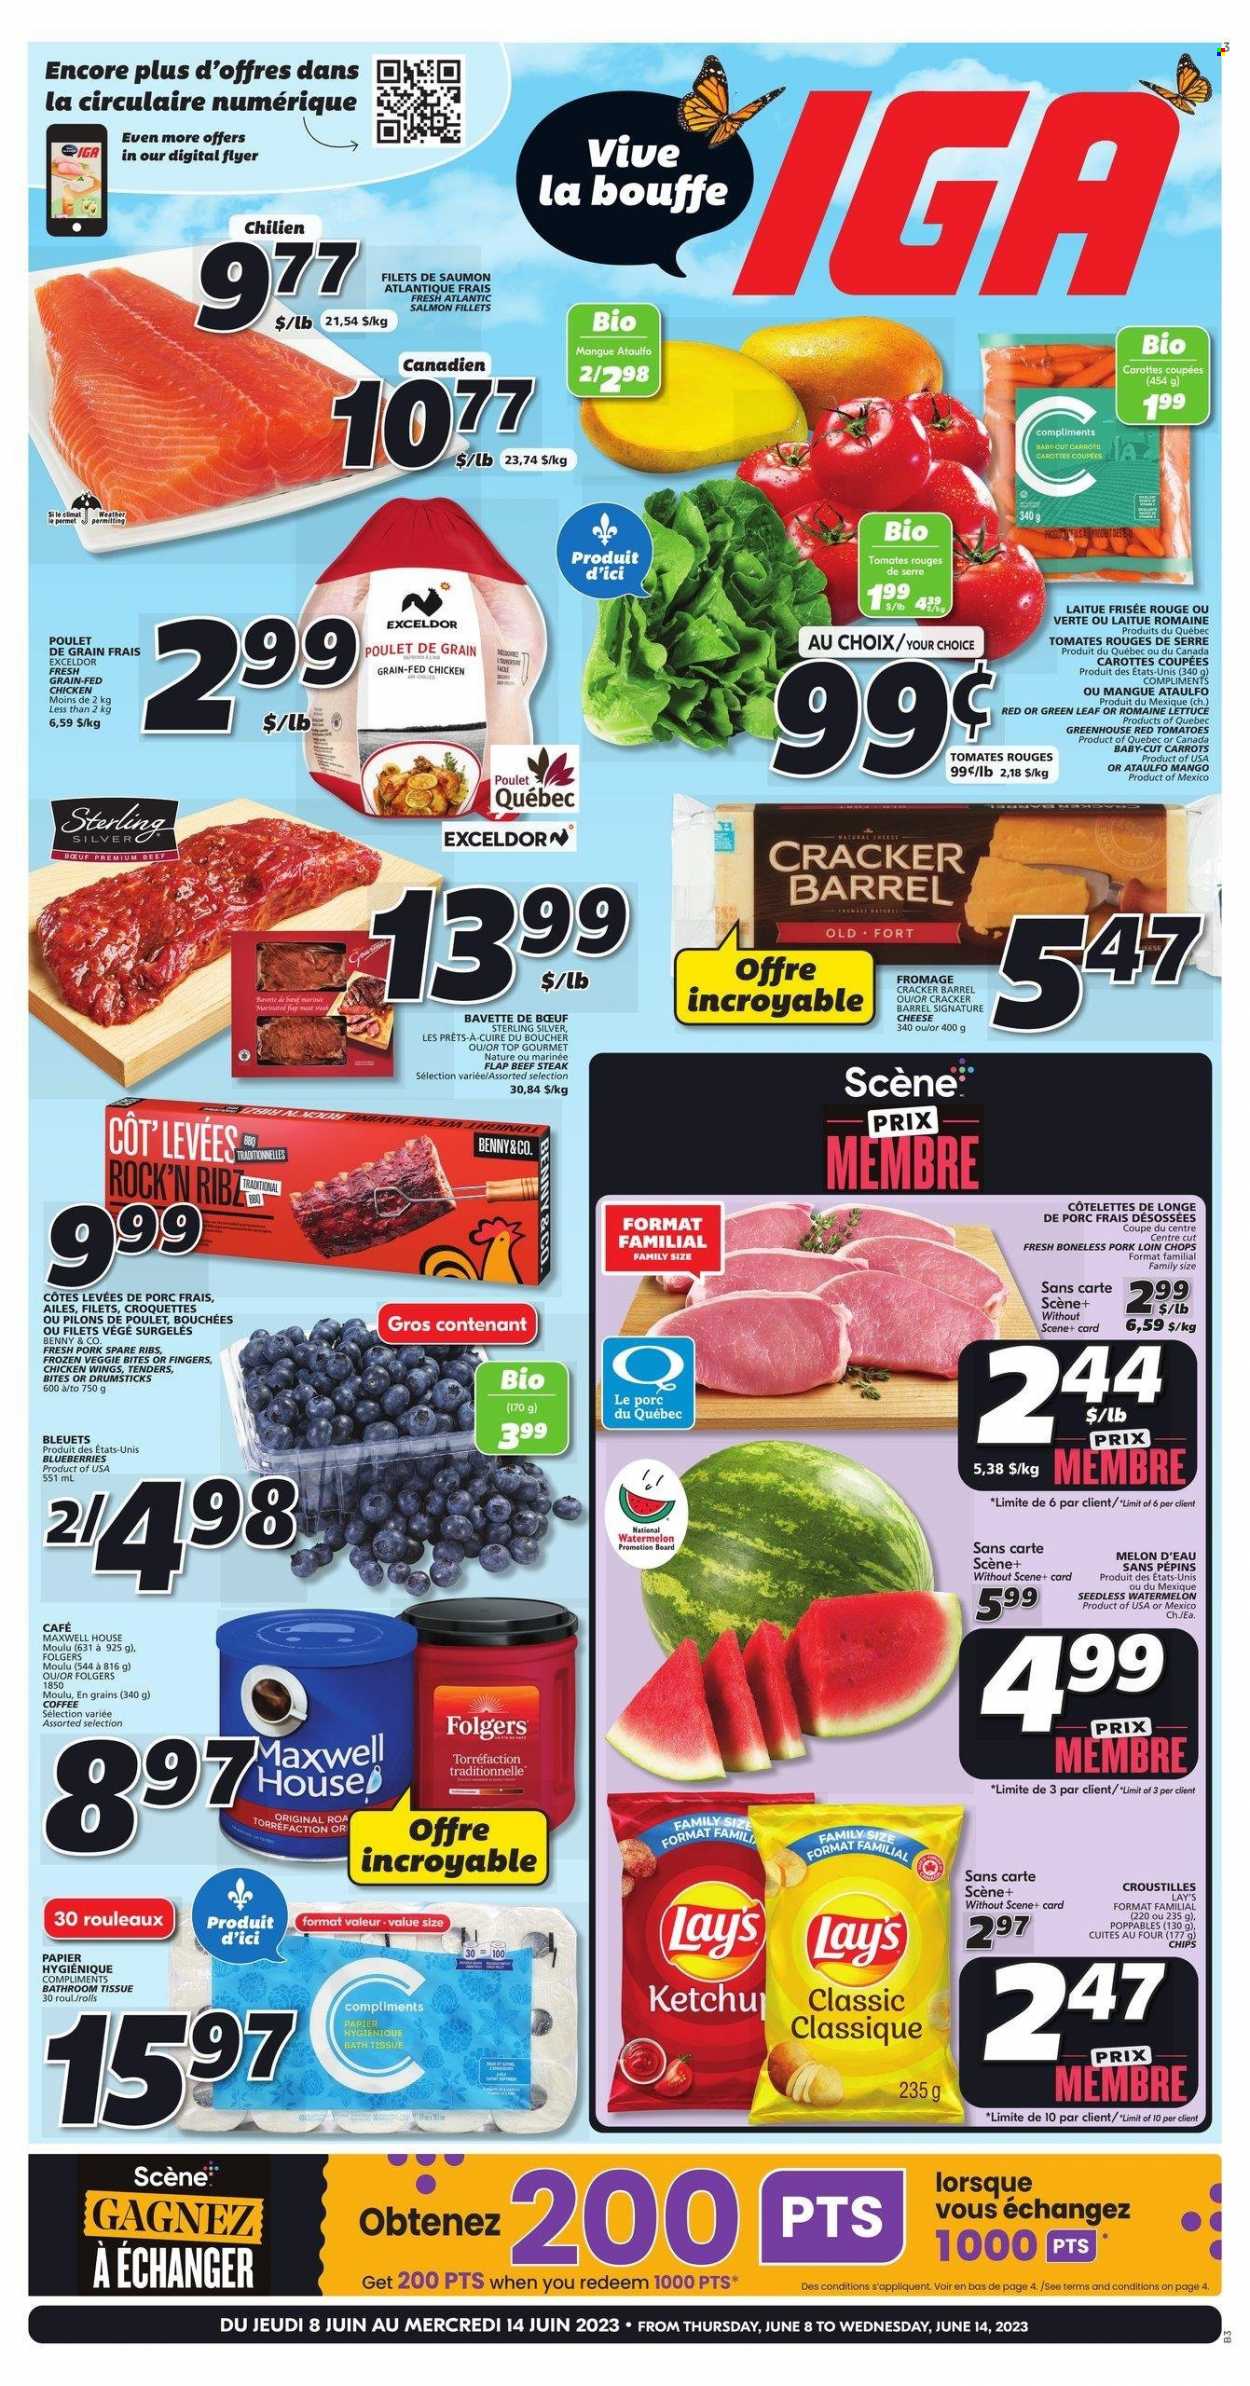 thumbnail - IGA Flyer - June 08, 2023 - June 14, 2023 - Sales products - carrots, tomatoes, lettuce, blueberries, mango, watermelon, melons, fish fillets, salmon, salmon fillet, chicken wings, crackers, Lay’s, Maxwell House, coffee, Folgers, chicken, beef meat, beef steak, steak, ribs, pork chops, pork loin, pork meat, pork ribs, pork spare ribs. Page 1.